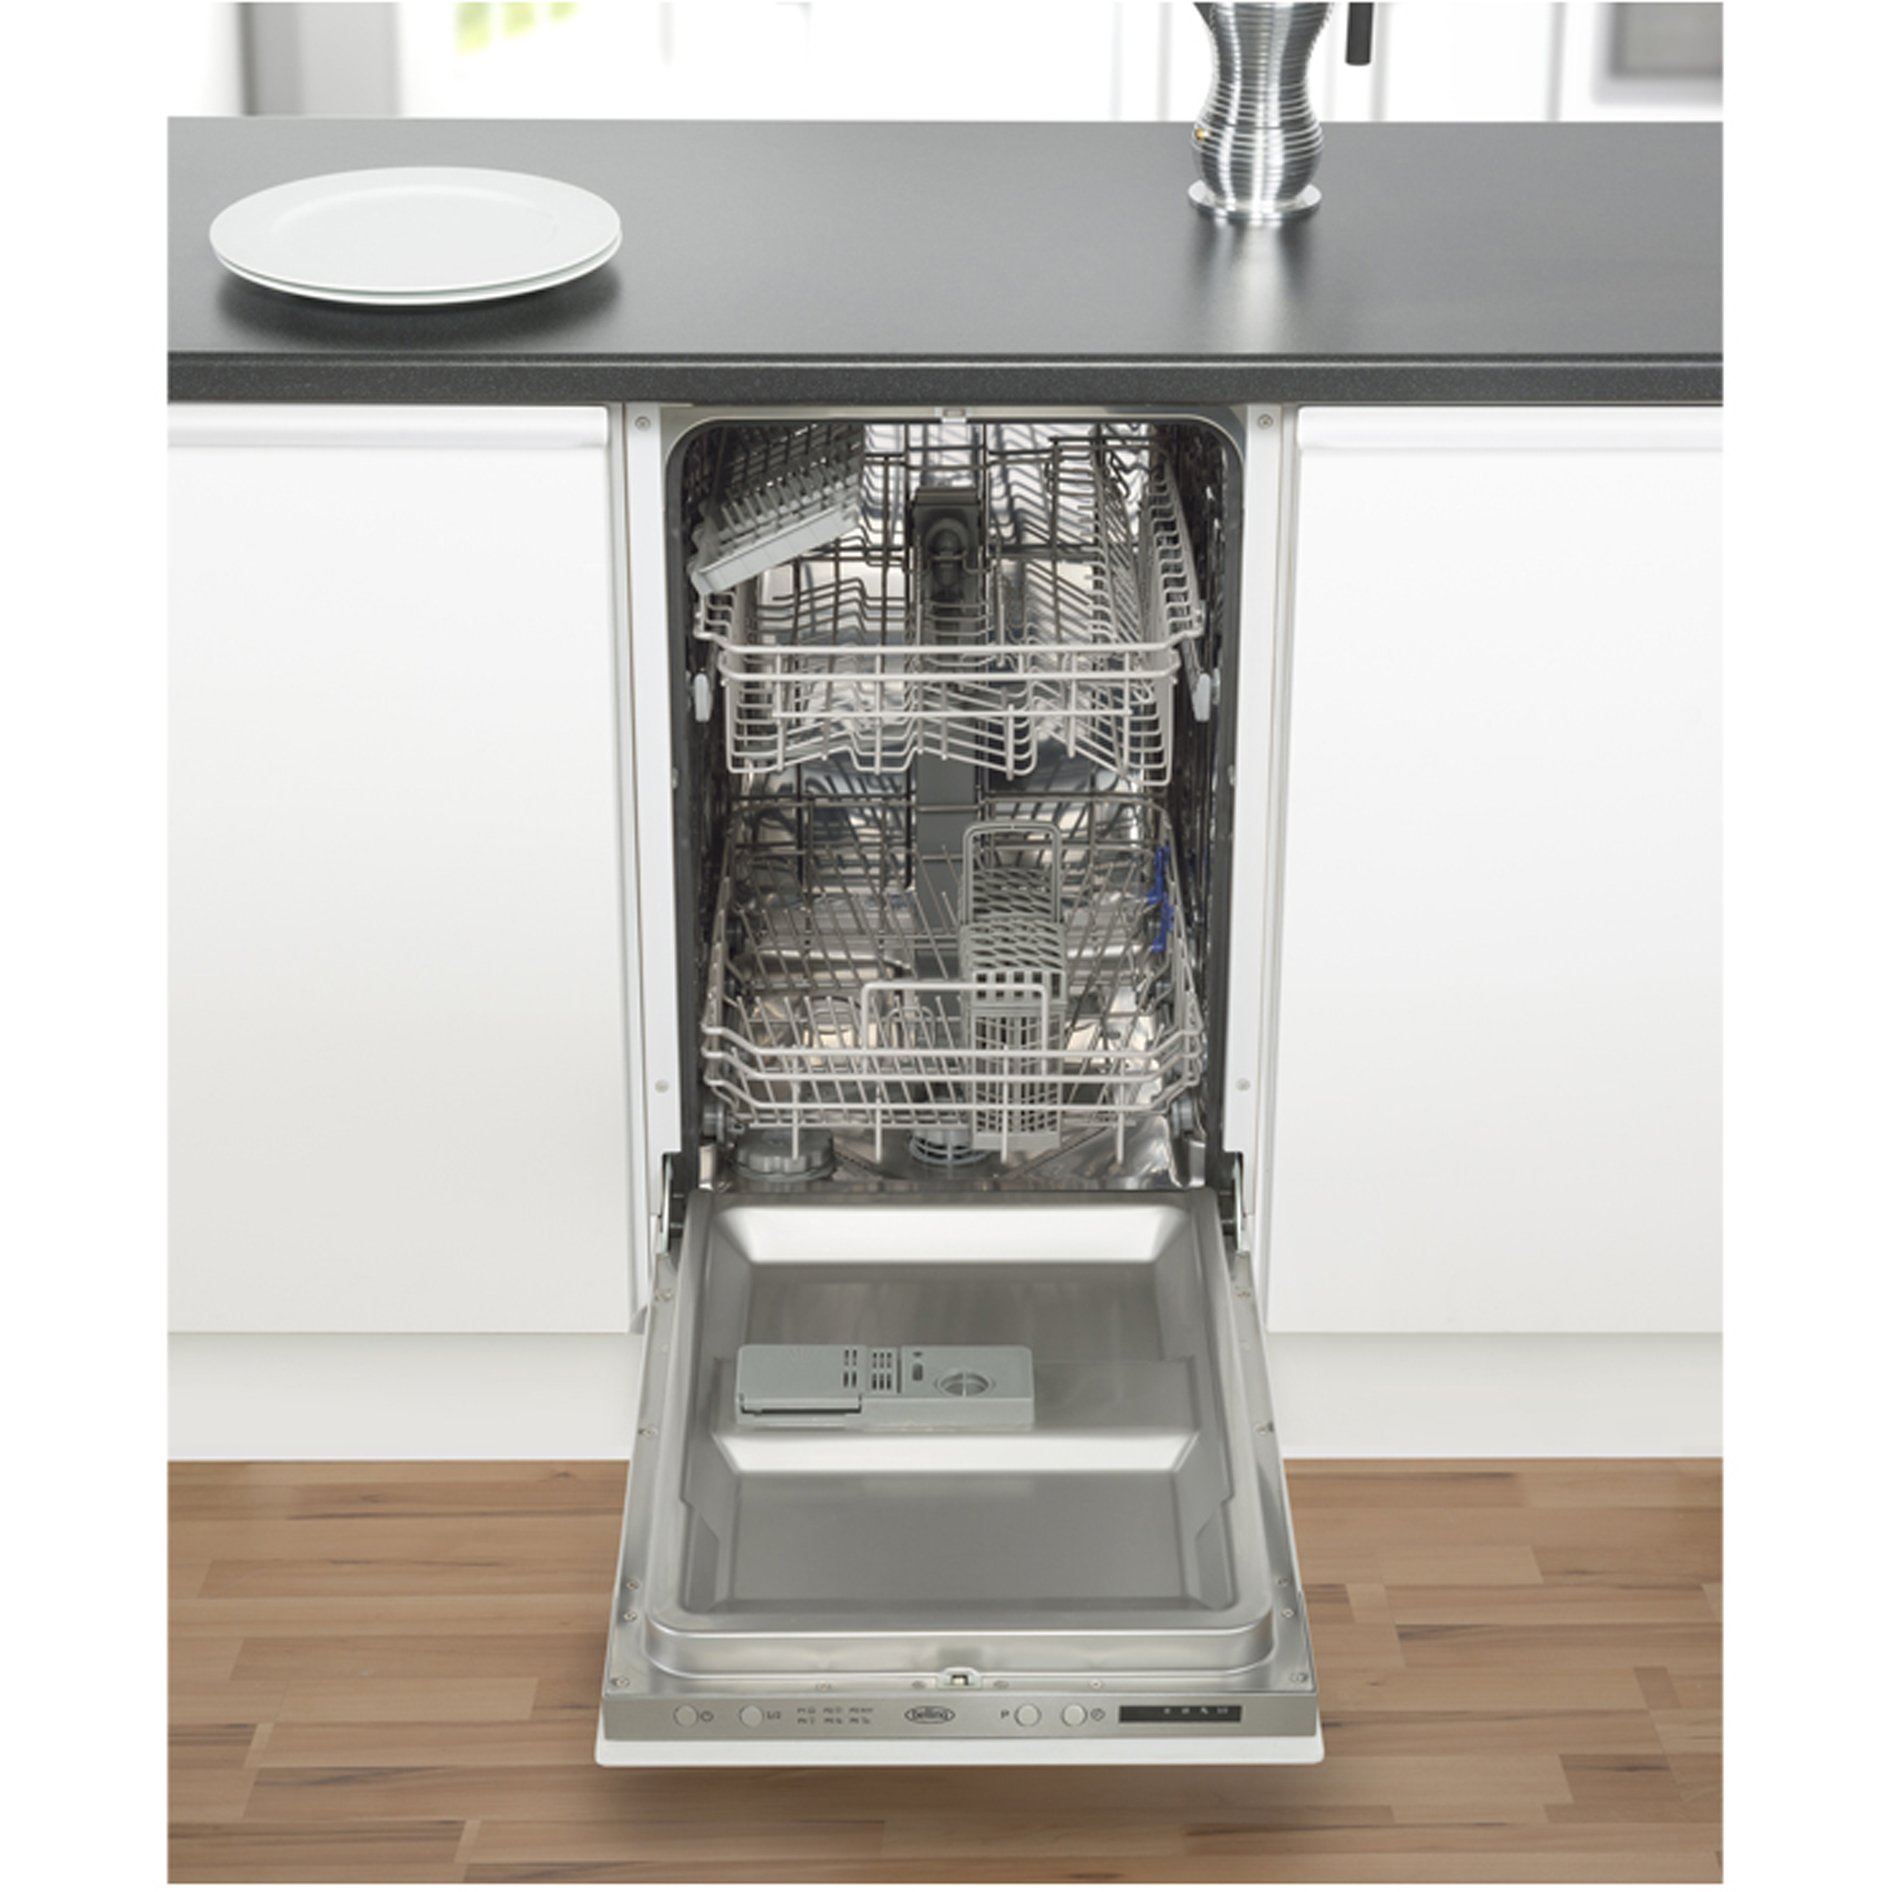 45cm 10 place setting integrated dishwasher features Delay Timer, Residual Heat Drying, Overflow Protection, adjustable upper basket and removable cutlery basket. 